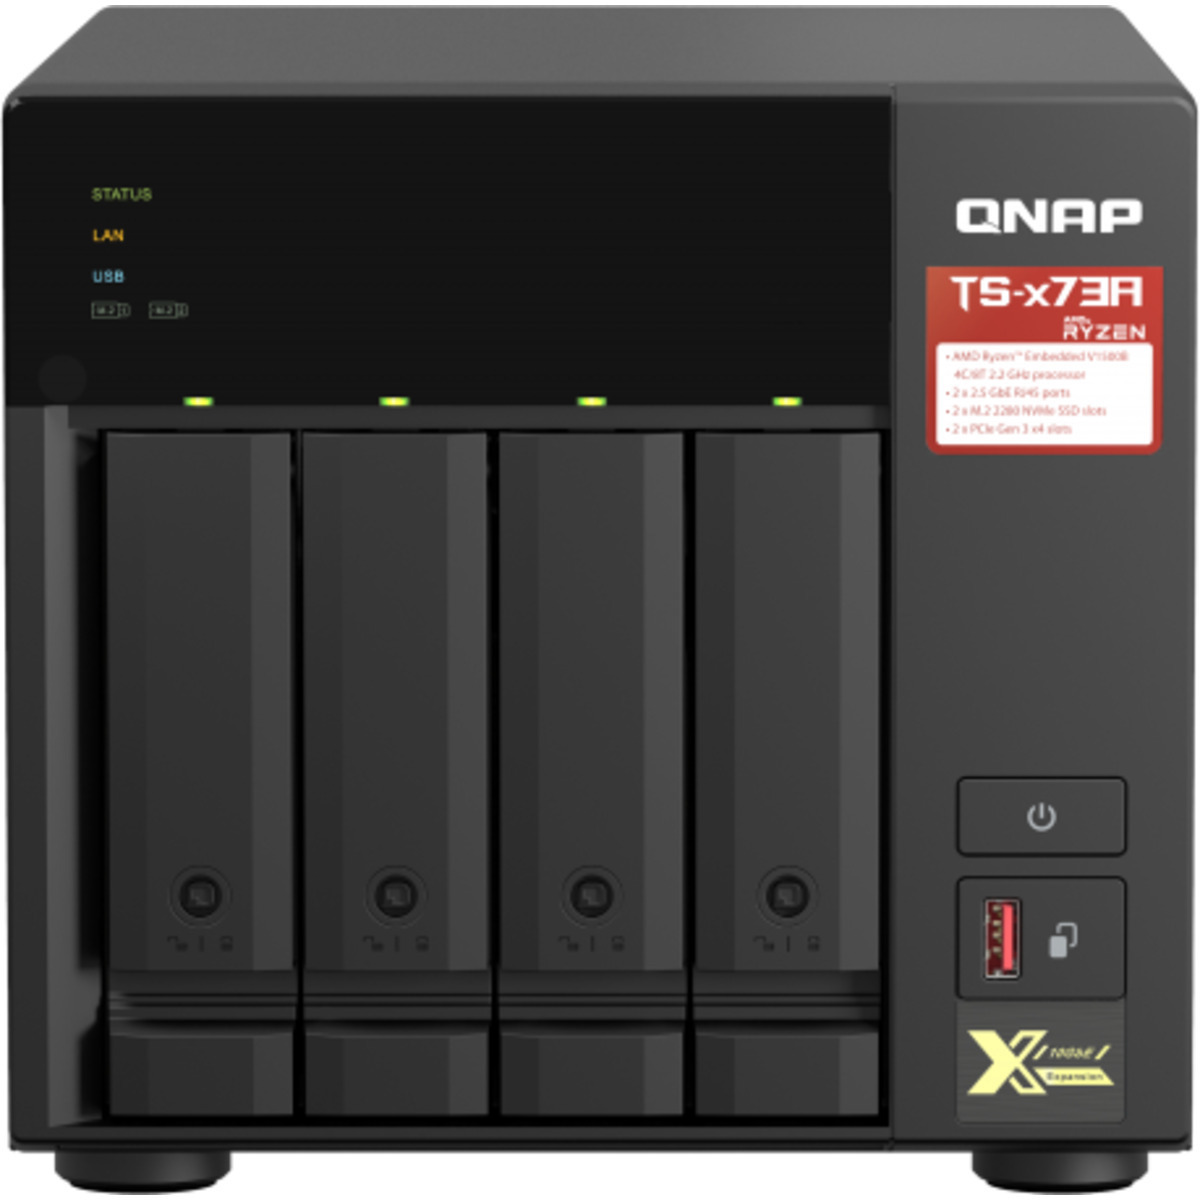 QNAP TS-473A 32tb 4-Bay Desktop Multimedia / Power User / Business NAS - Network Attached Storage Device 4x8tb Seagate EXOS 7E10 ST8000NM017B 3.5 7200rpm SATA 6Gb/s HDD ENTERPRISE Class Drives Installed - Burn-In Tested TS-473A